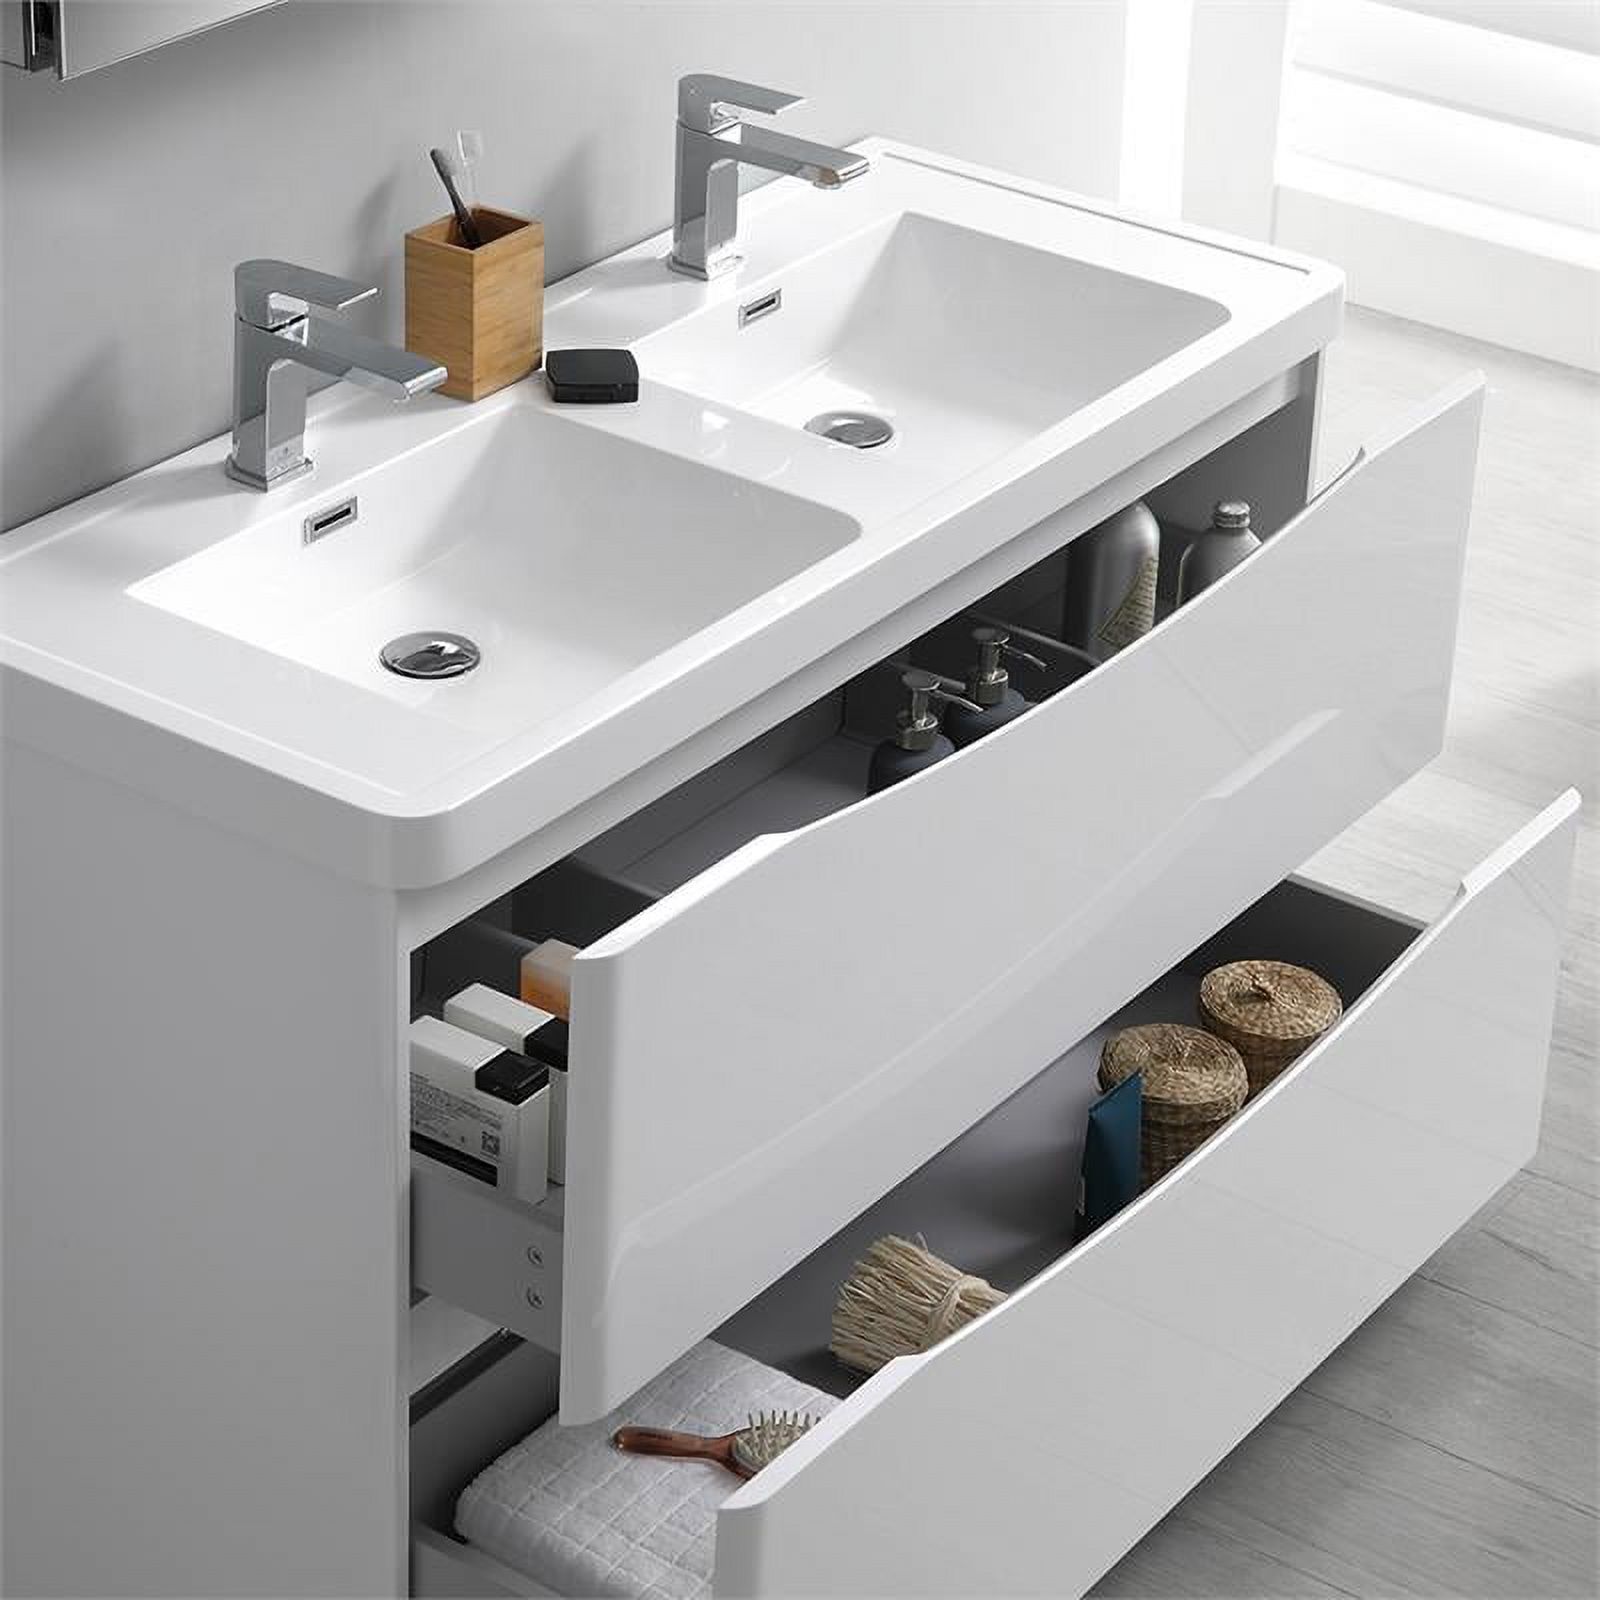 Fresca Tuscany 48" Wood Bathroom Vanity with Double Sinks in Glossy White - image 3 of 8